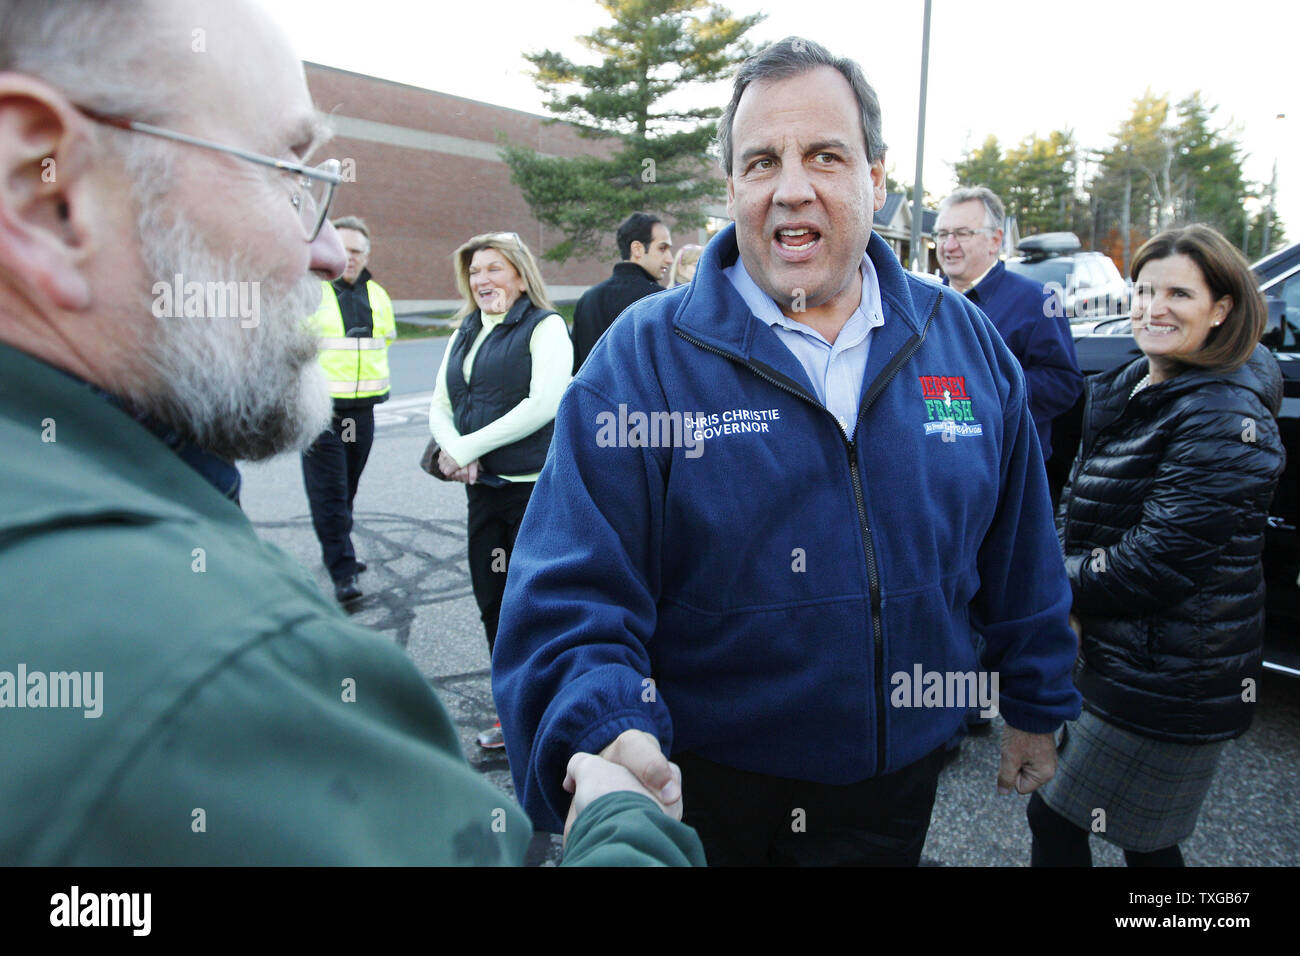 New Jersey Governor Chris Christie (C) shakes hands with a supporter as wife Mary Pat Christie (R) looks on, after Christie spoke to voters at MacKenna's Restaurant in New London, New Hampshire on November 3, 2014. Christie was visiting to support Republican candidate for Senator in New Hampshire, Scott Brown. UPI/Matthew Healey Stock Photo